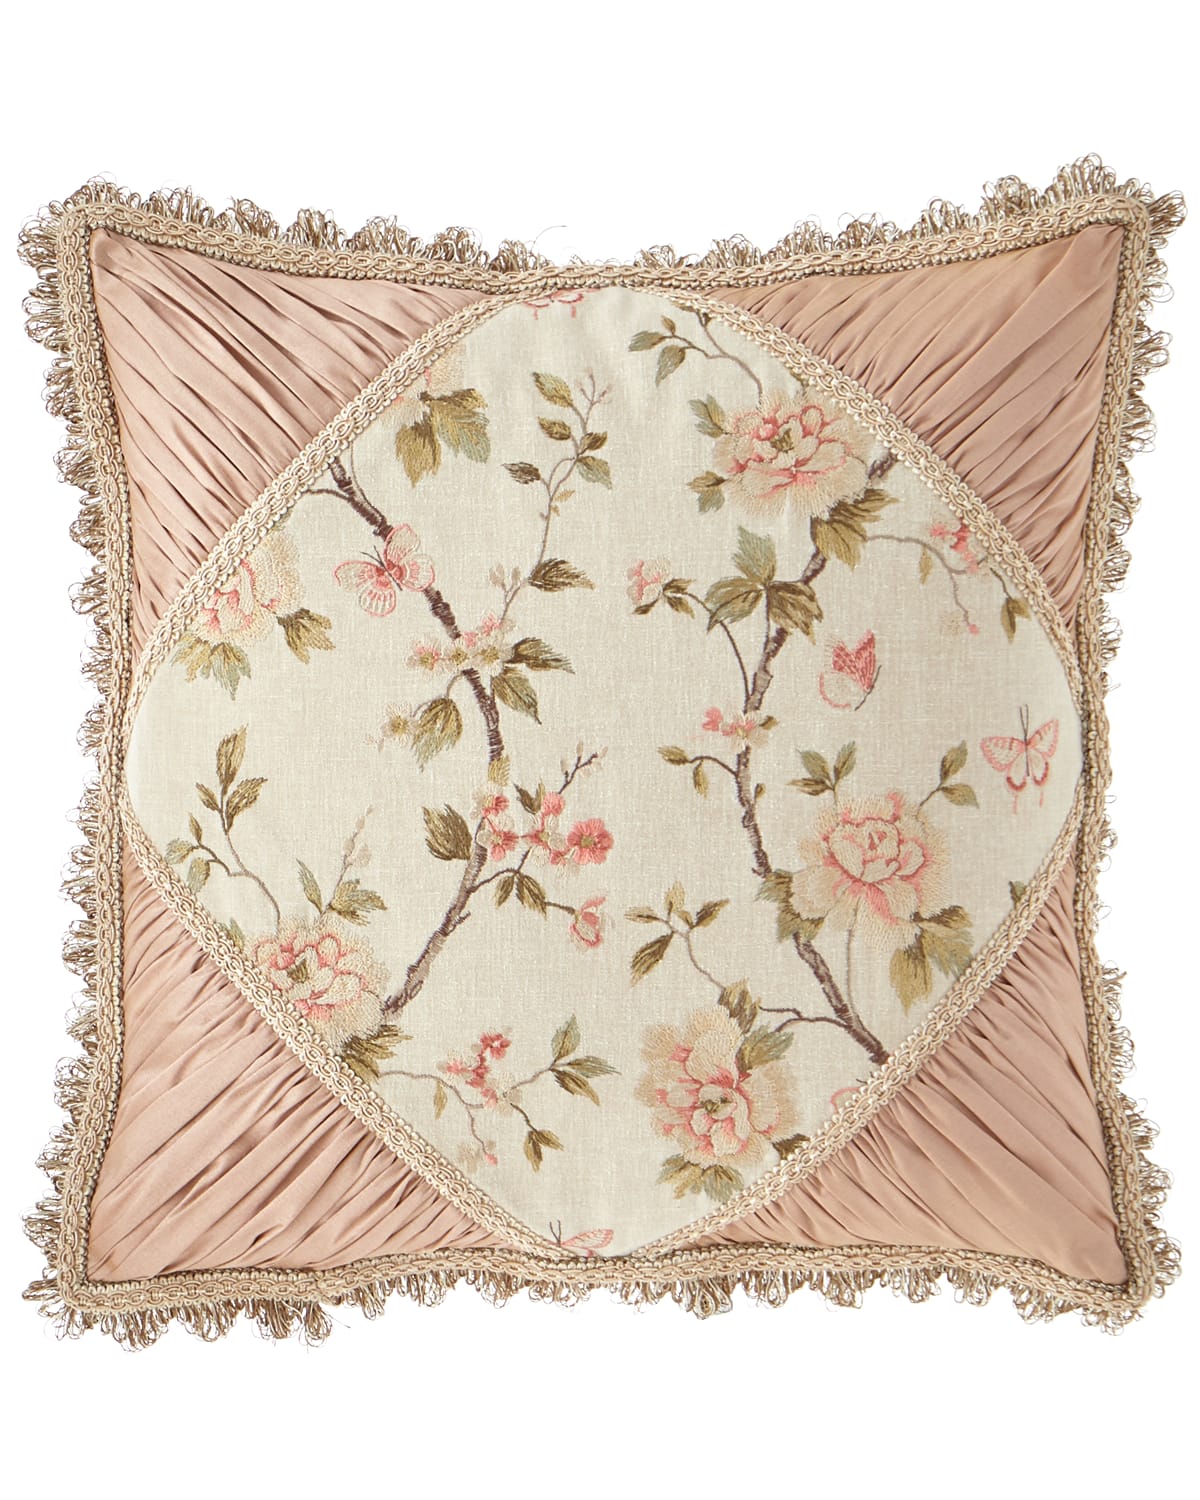 Image Sweet Dreams Delilah Pieced Square Pillow